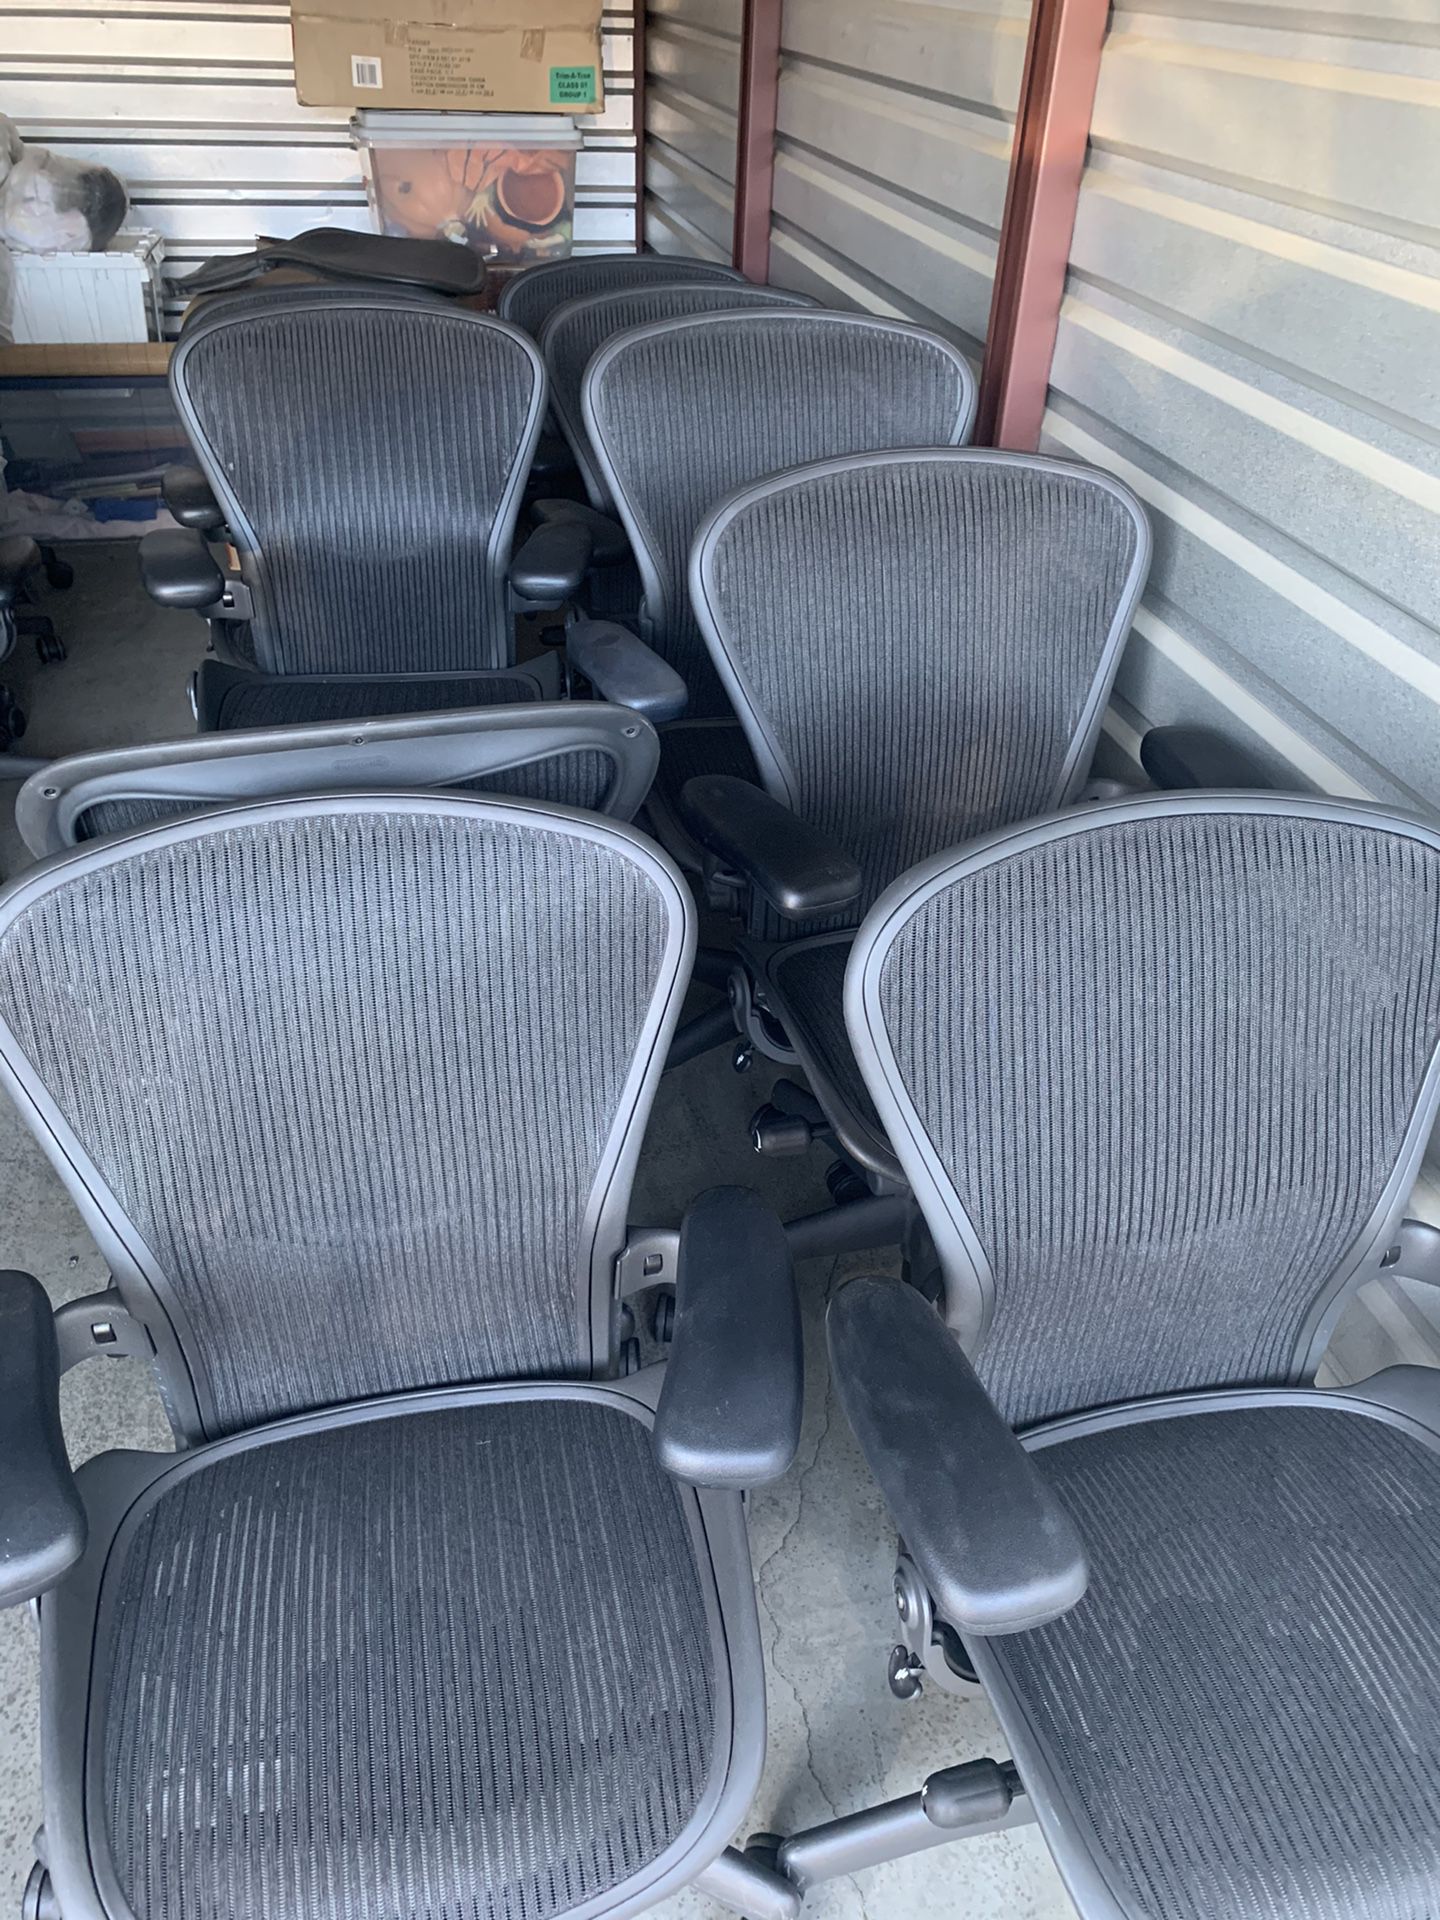 HERMAN MILLER AERON OFFICE CHAIRS , FULLY LOADED $380 EACH TODAY ONLY